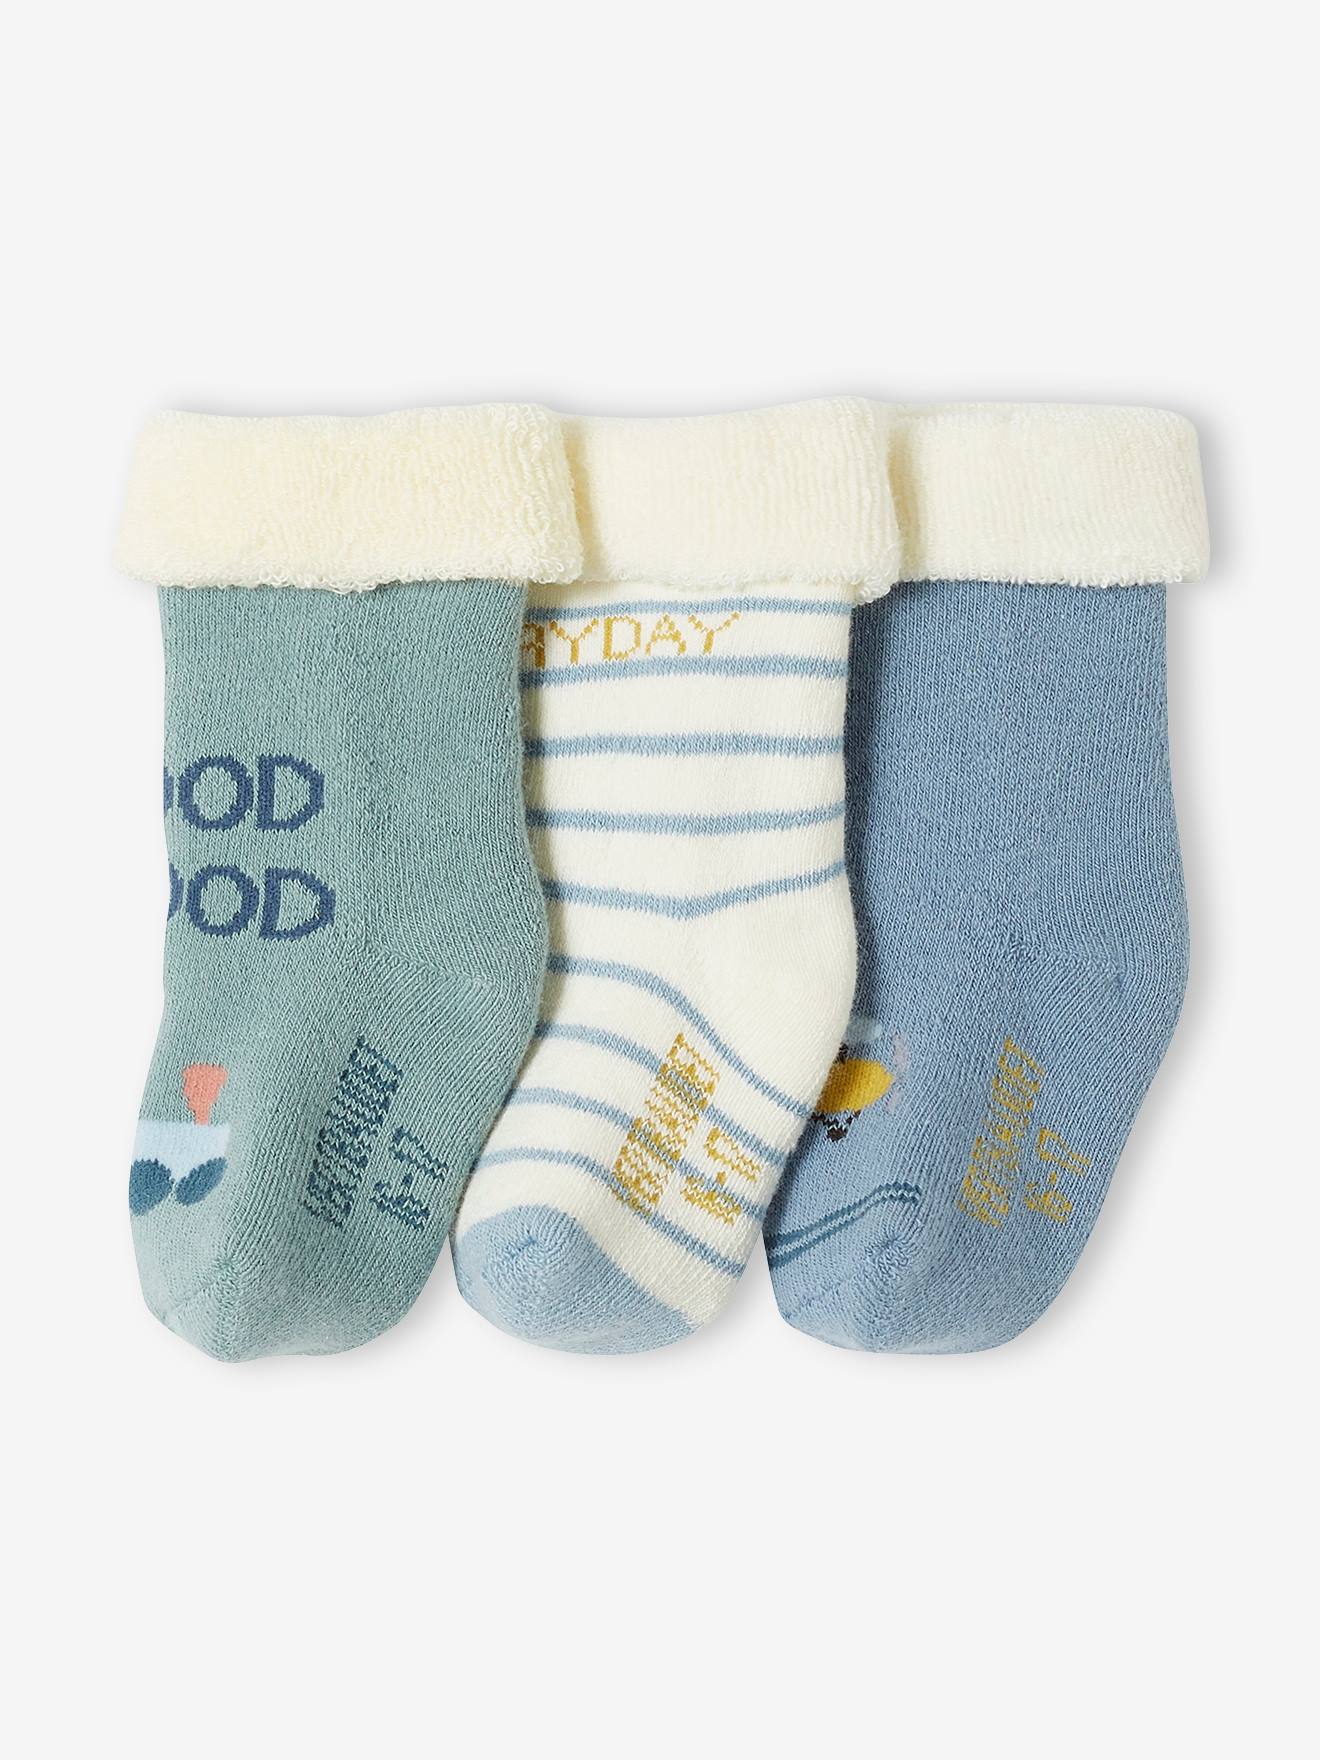 Pack of 3 Pairs of Plane & Train Socks for Baby Boys crystal blue